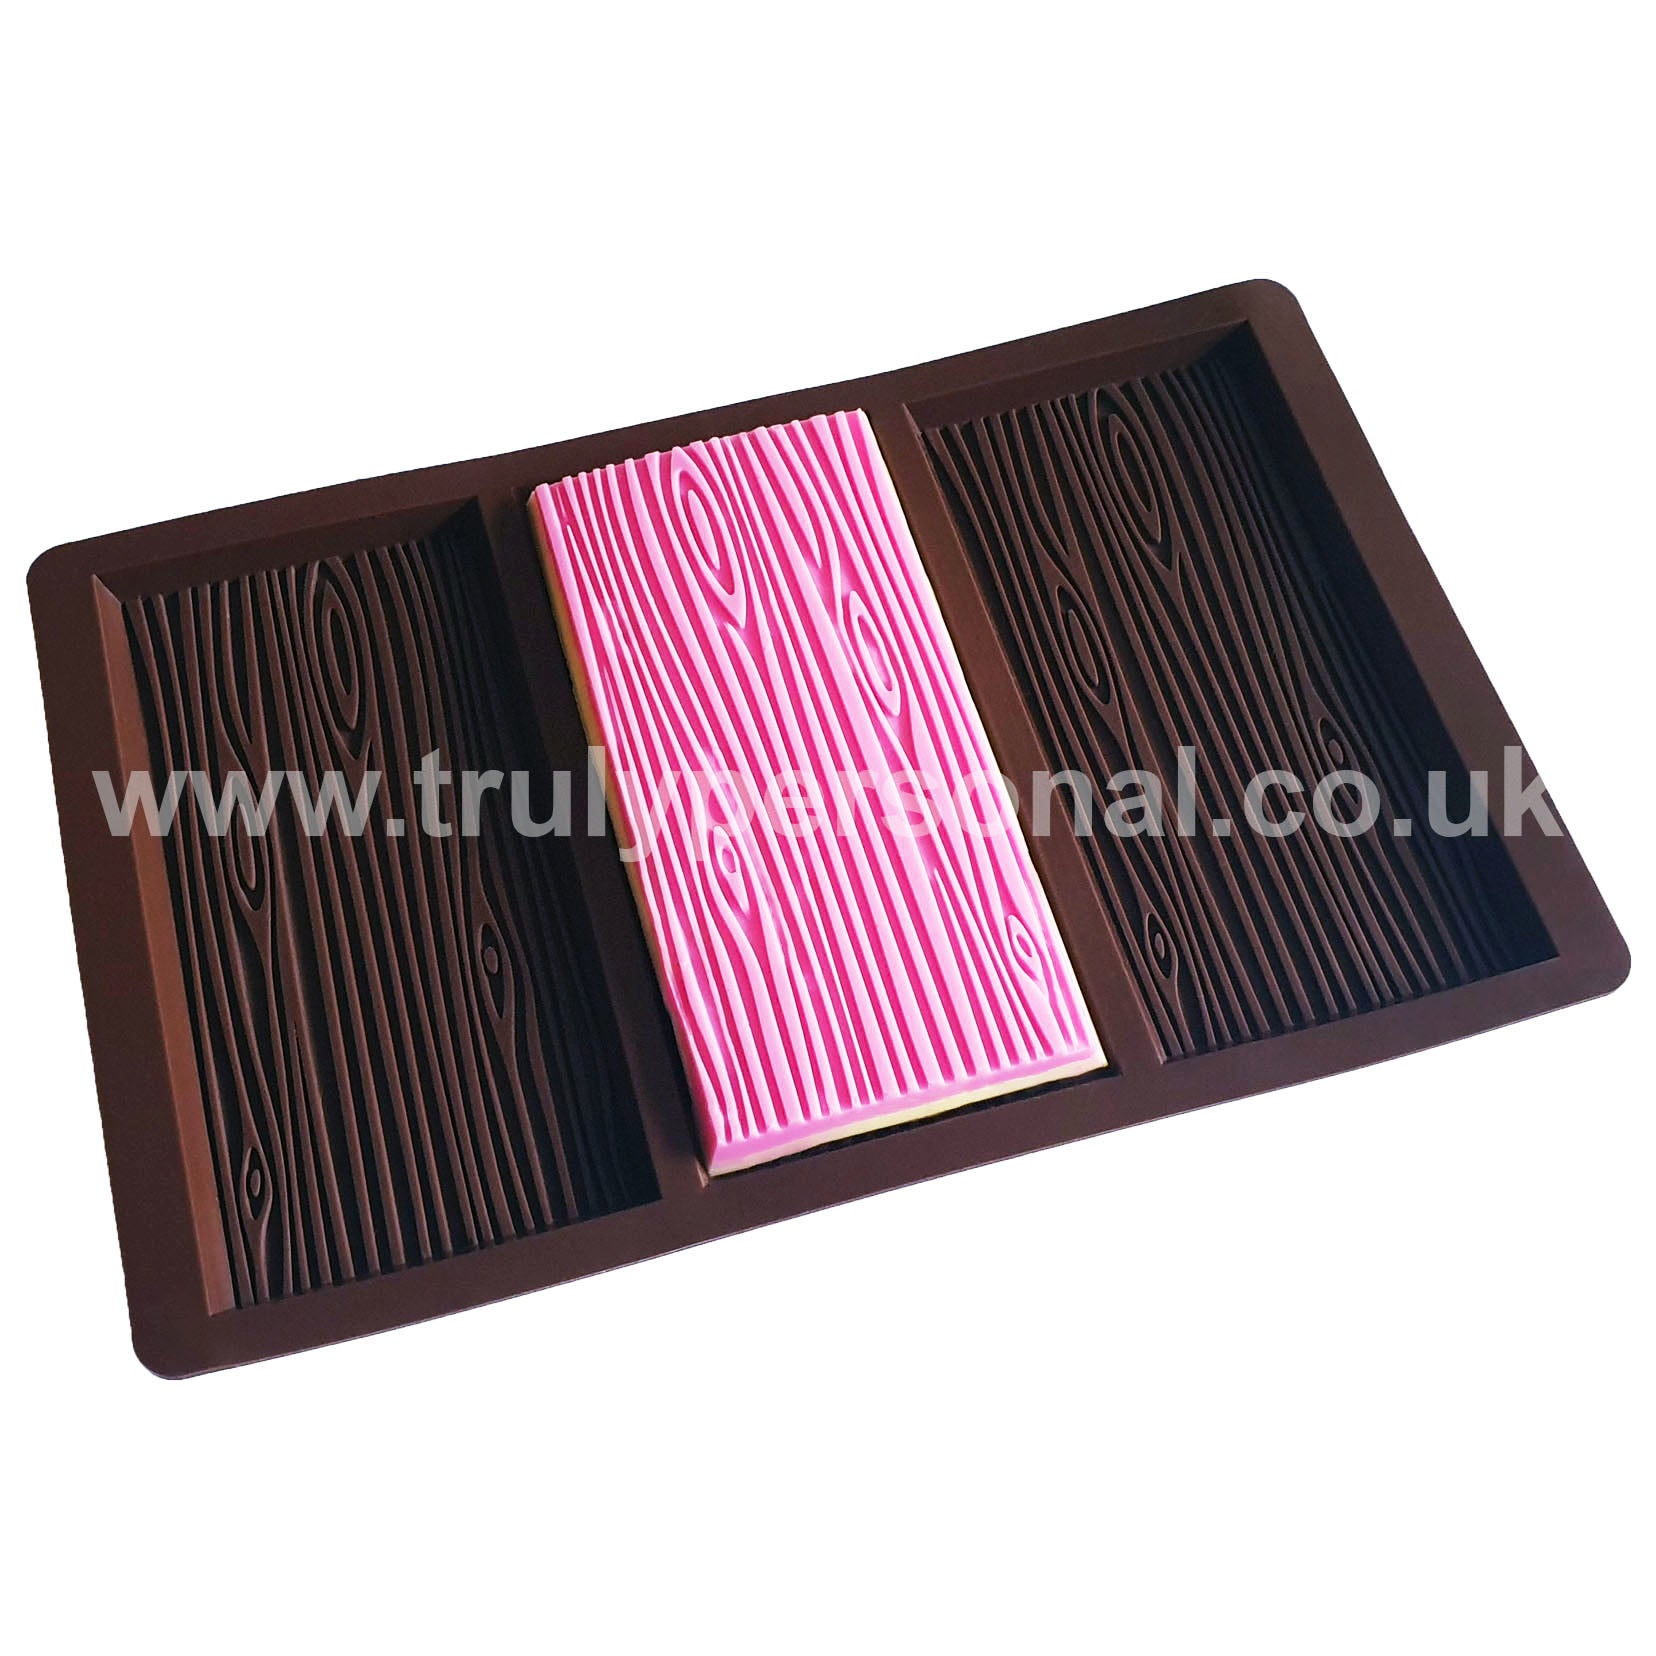 Wood Grain Bar Silicone Mould - 3 Cell | Wax Melts | Truly Personal Ltd